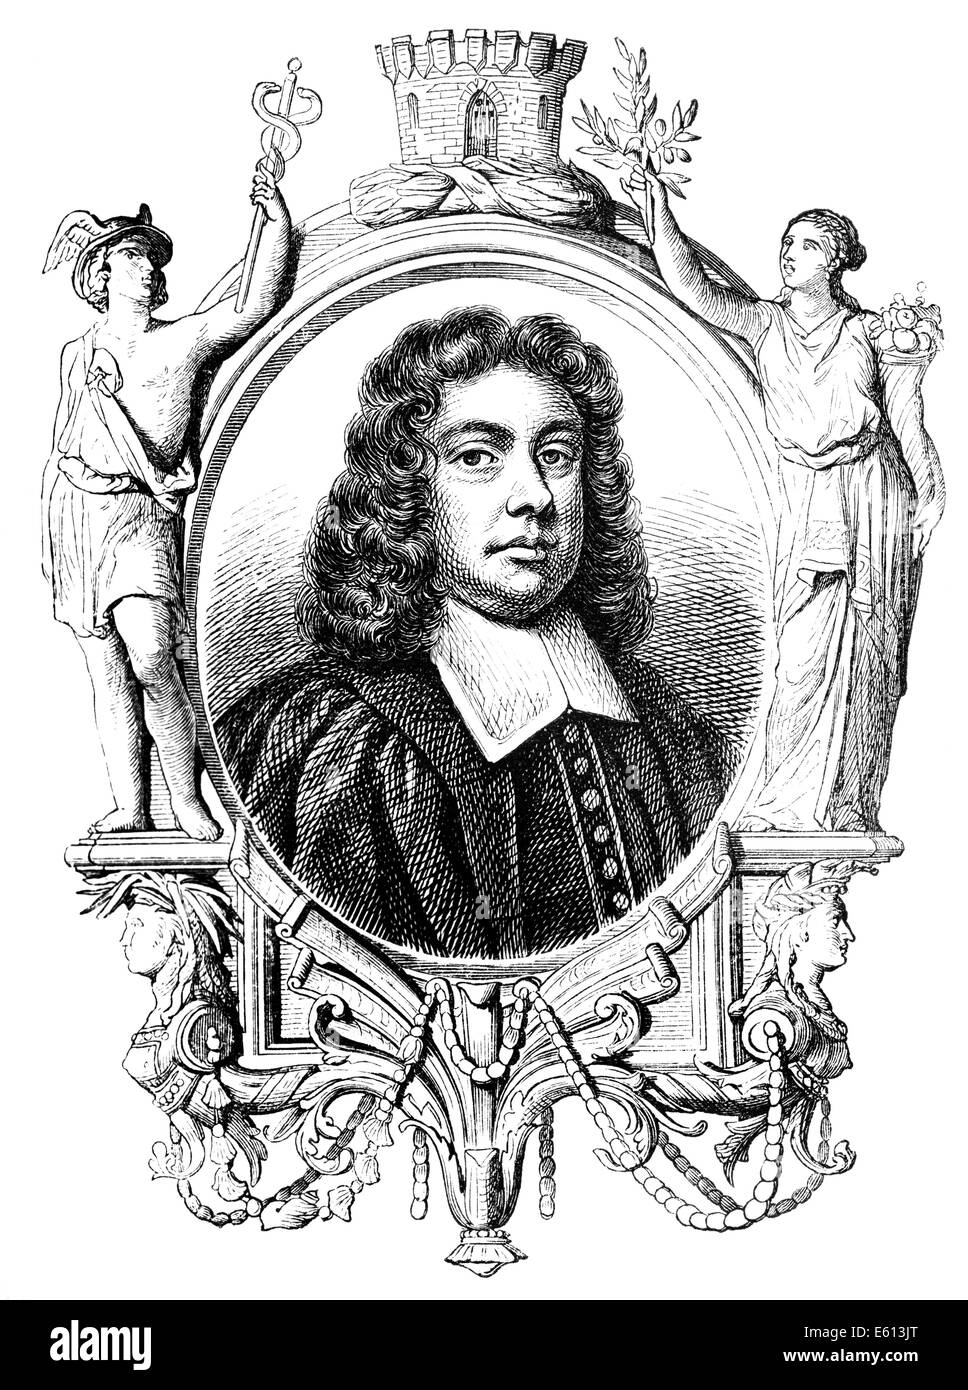 Sir Henry Pollexfen, 1632-1691, a British judge and politician, Stock Photo